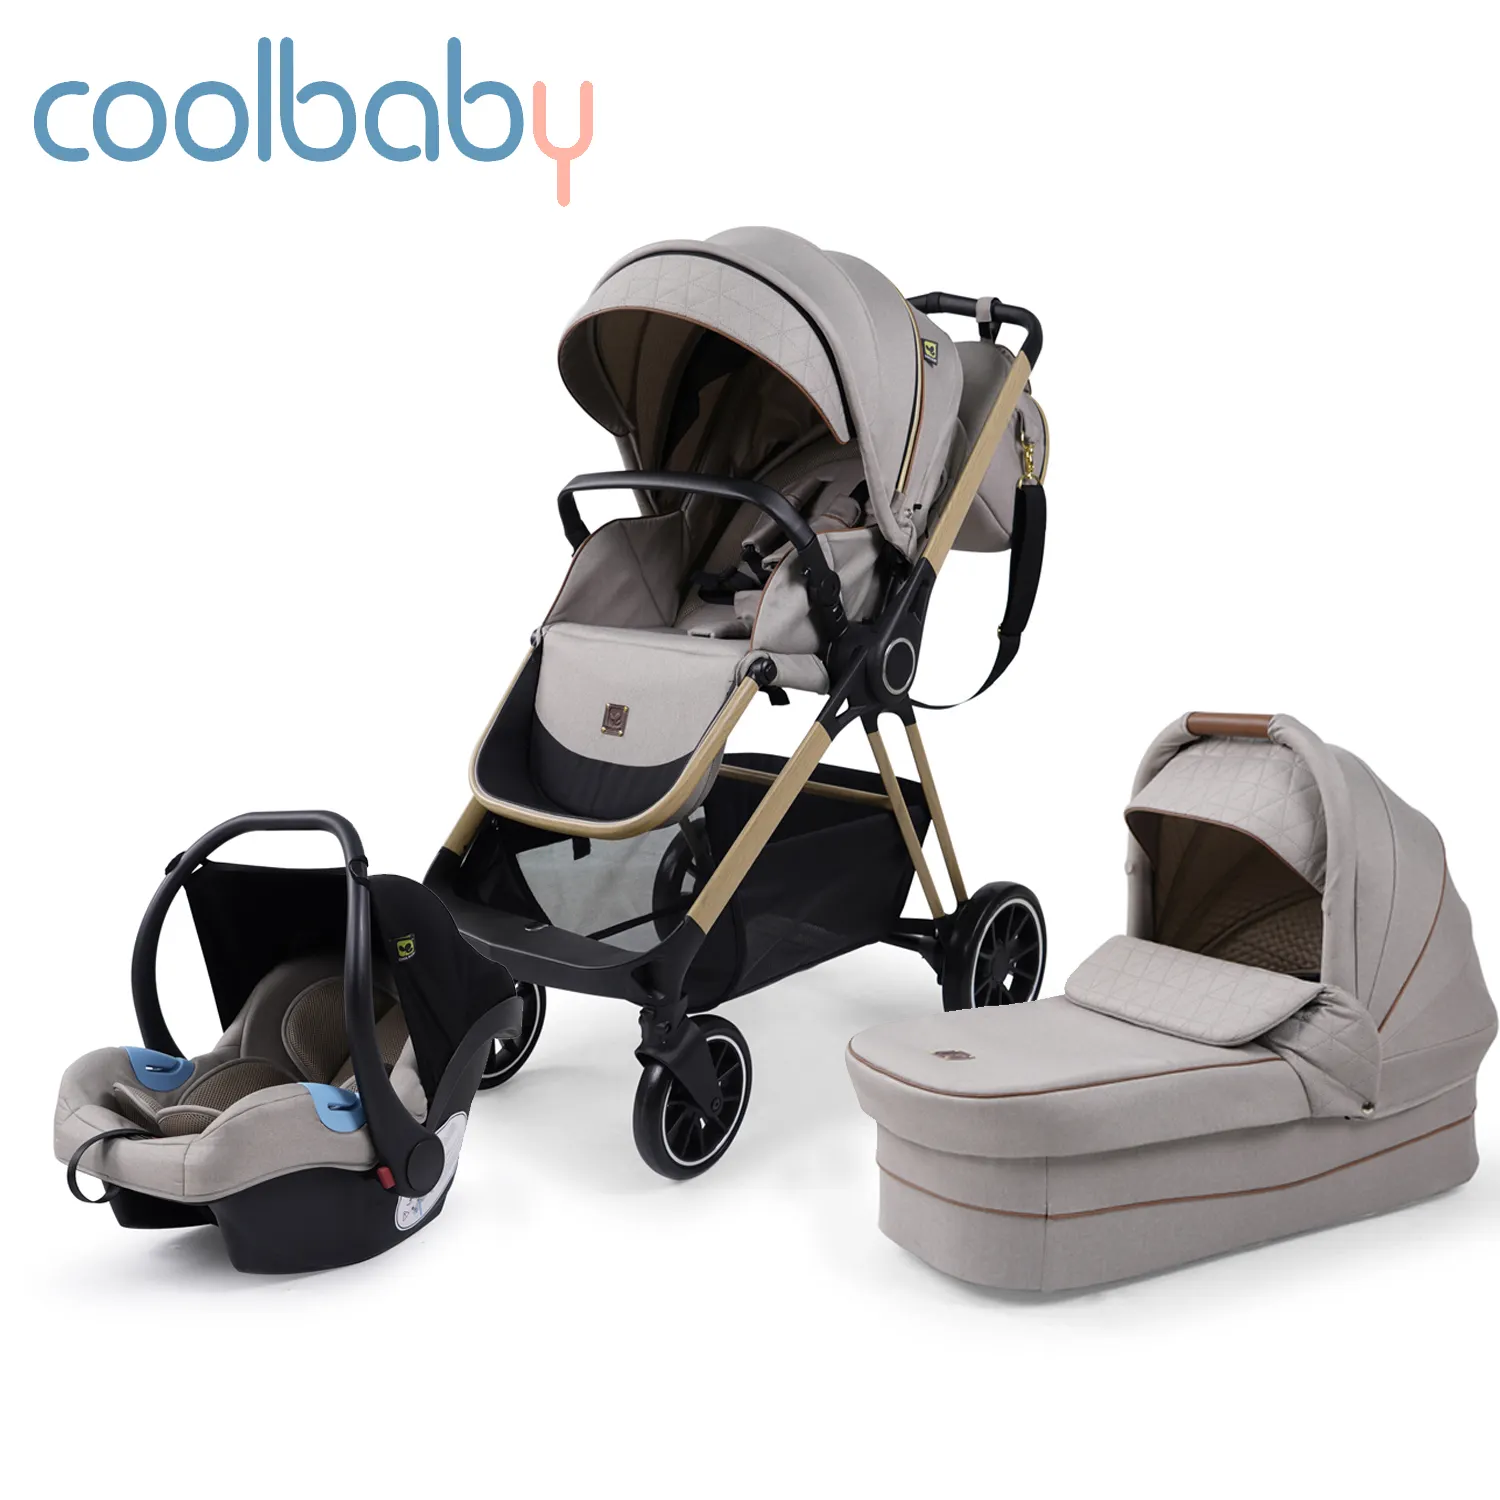 Cool baby 3 in 1 luxury baby stroller with CE Certificate